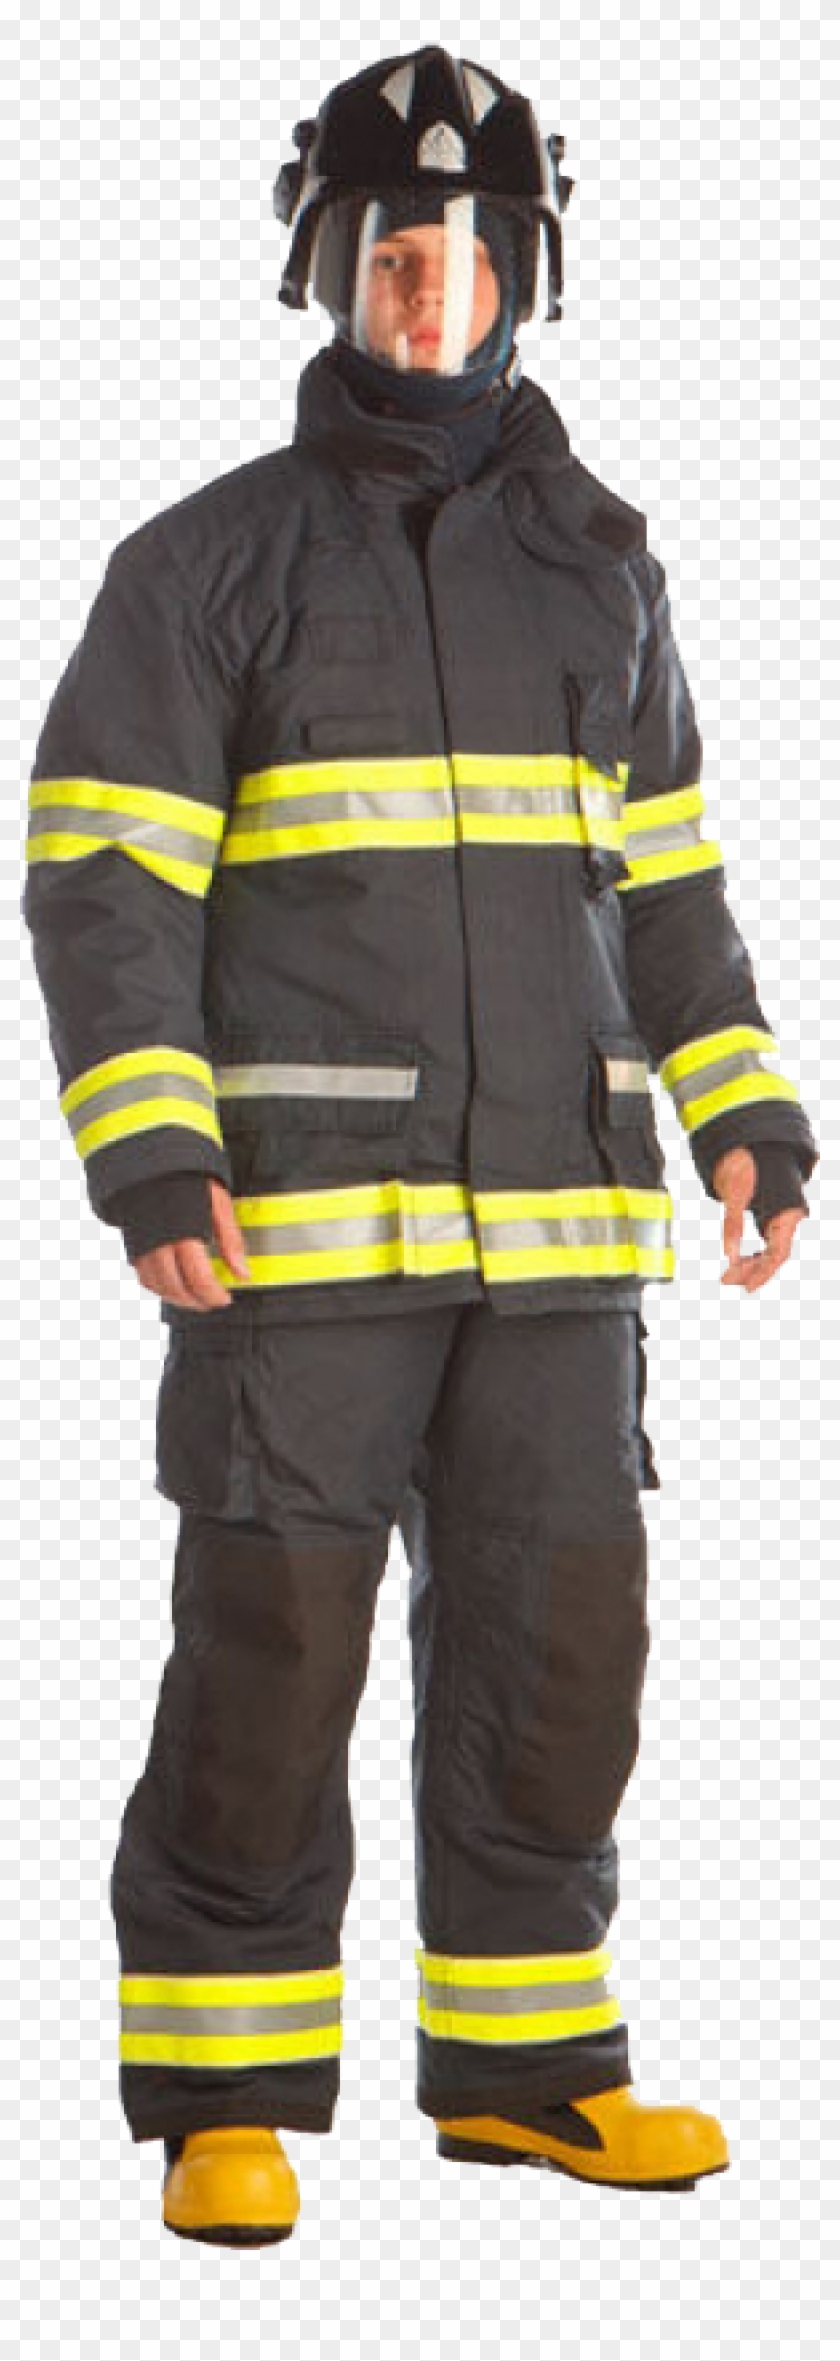 Firefighter Png #396219